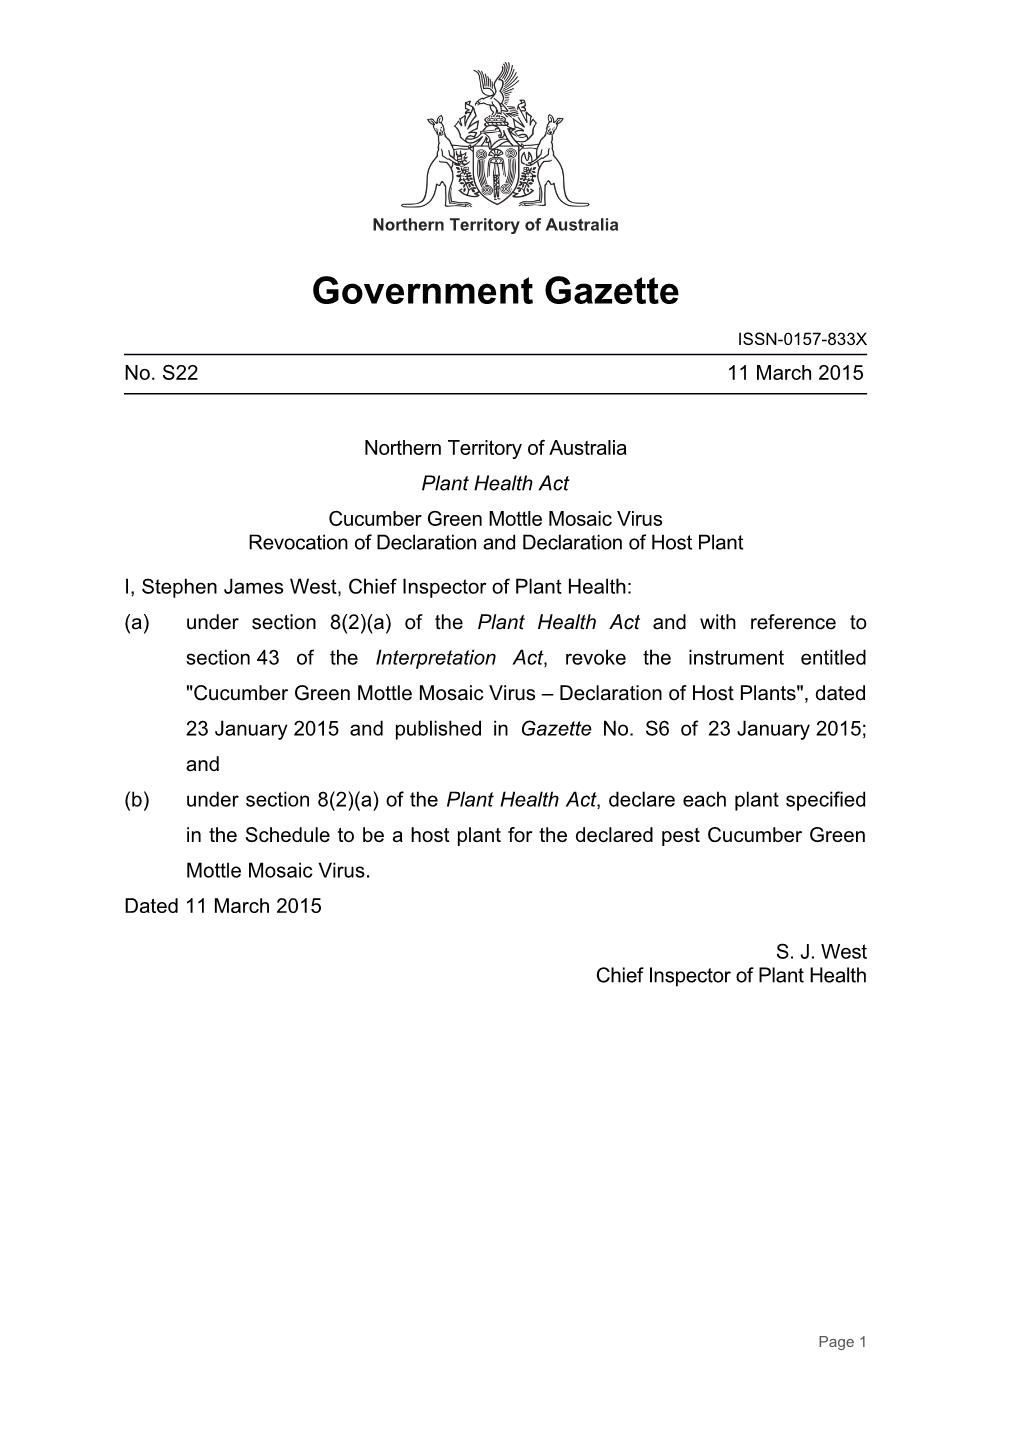 Northern Territory Government Gazette No. S22, 11 March2015